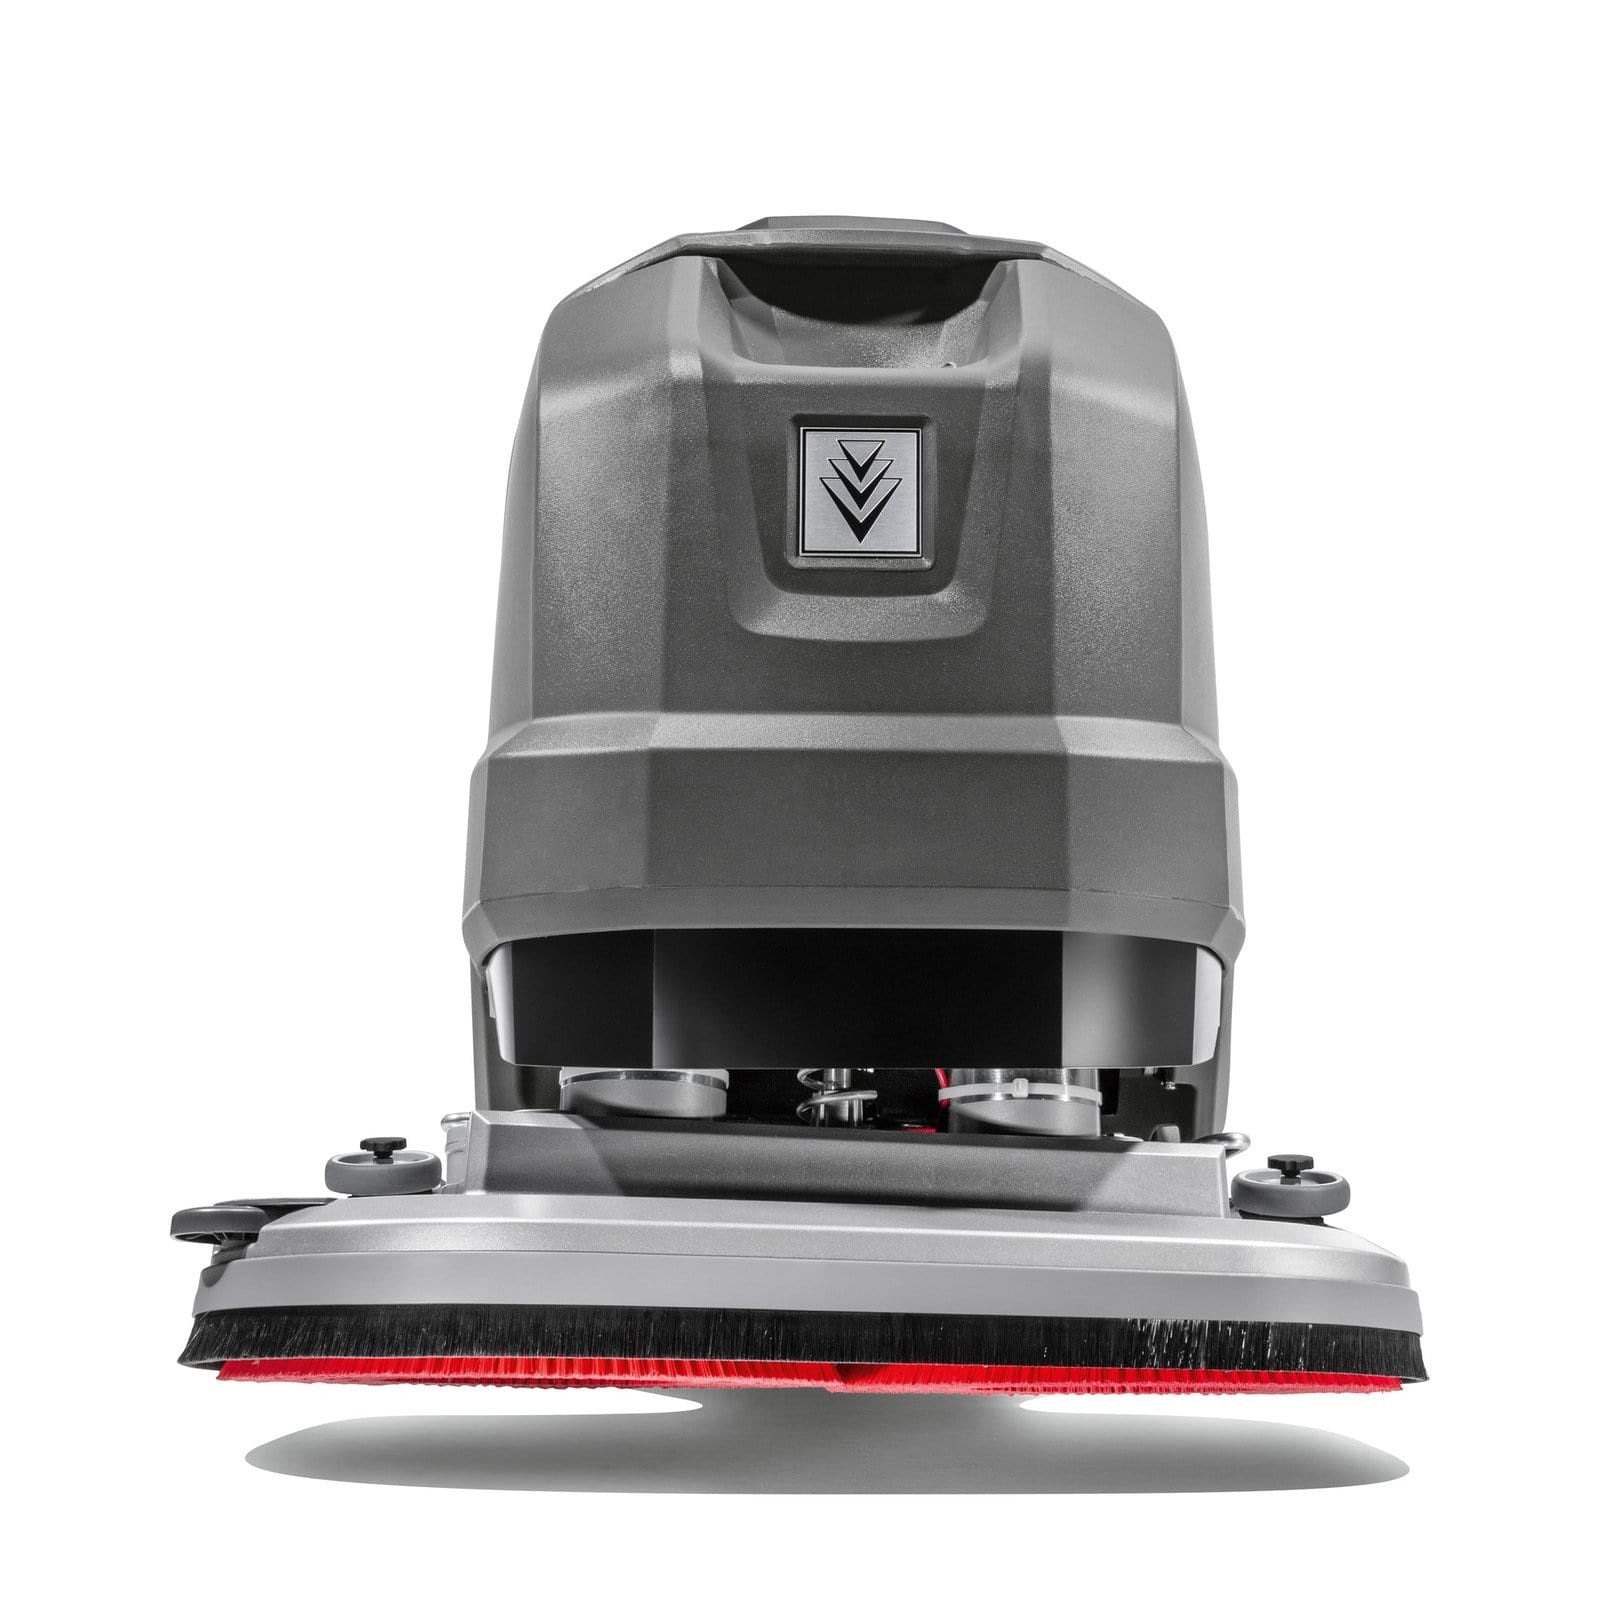 Karcher Scrubber Drier - BD 80/100 W Classic Bp | Supply Master | Accra, Ghana Tools Building Steel Engineering Hardware tool